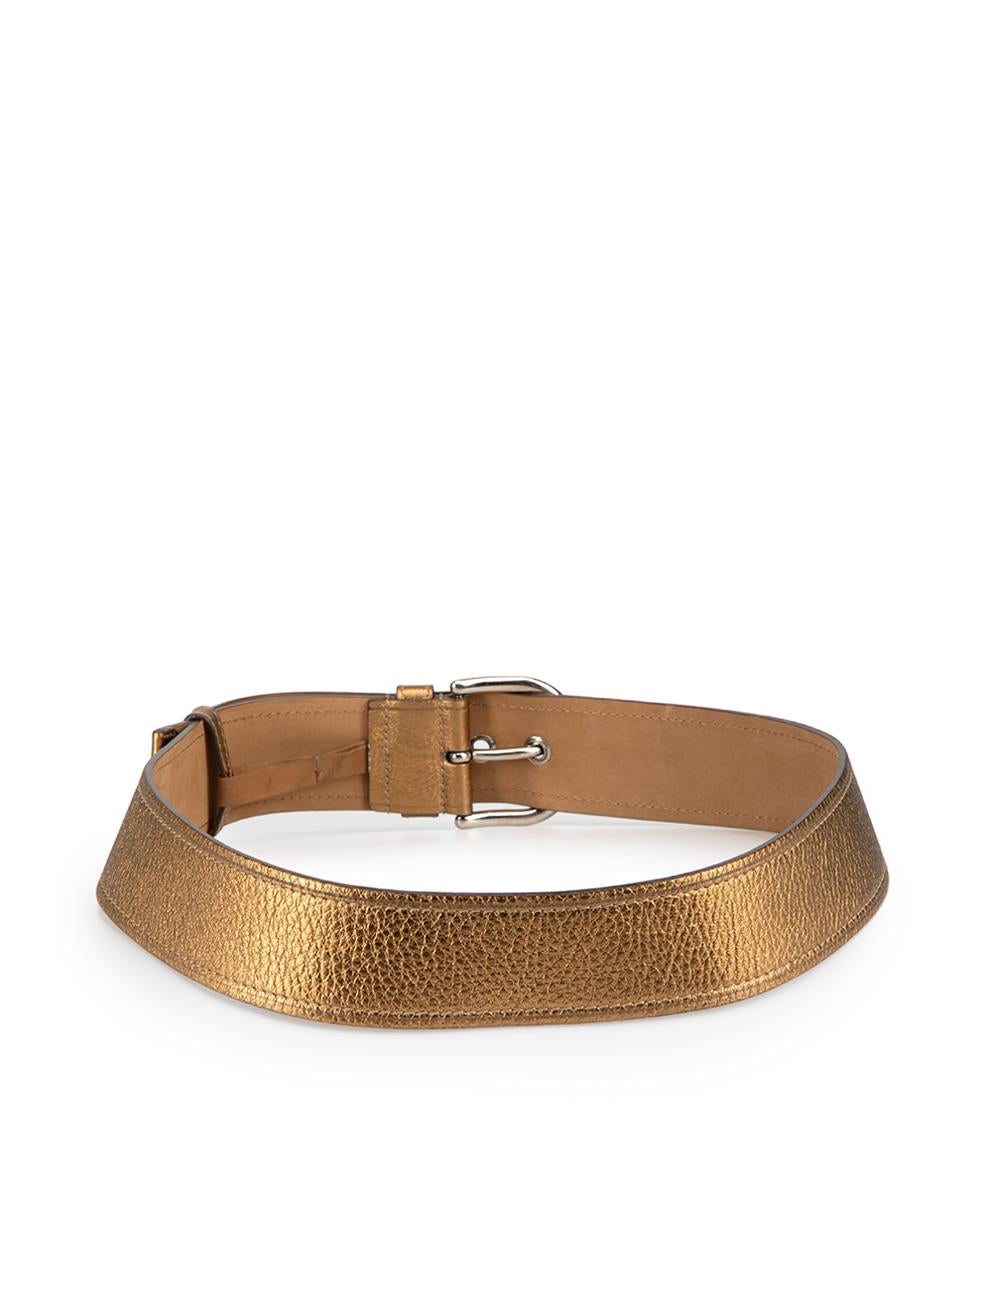 Prada Women's Gold Leather Metallic Belt In Good Condition For Sale In London, GB